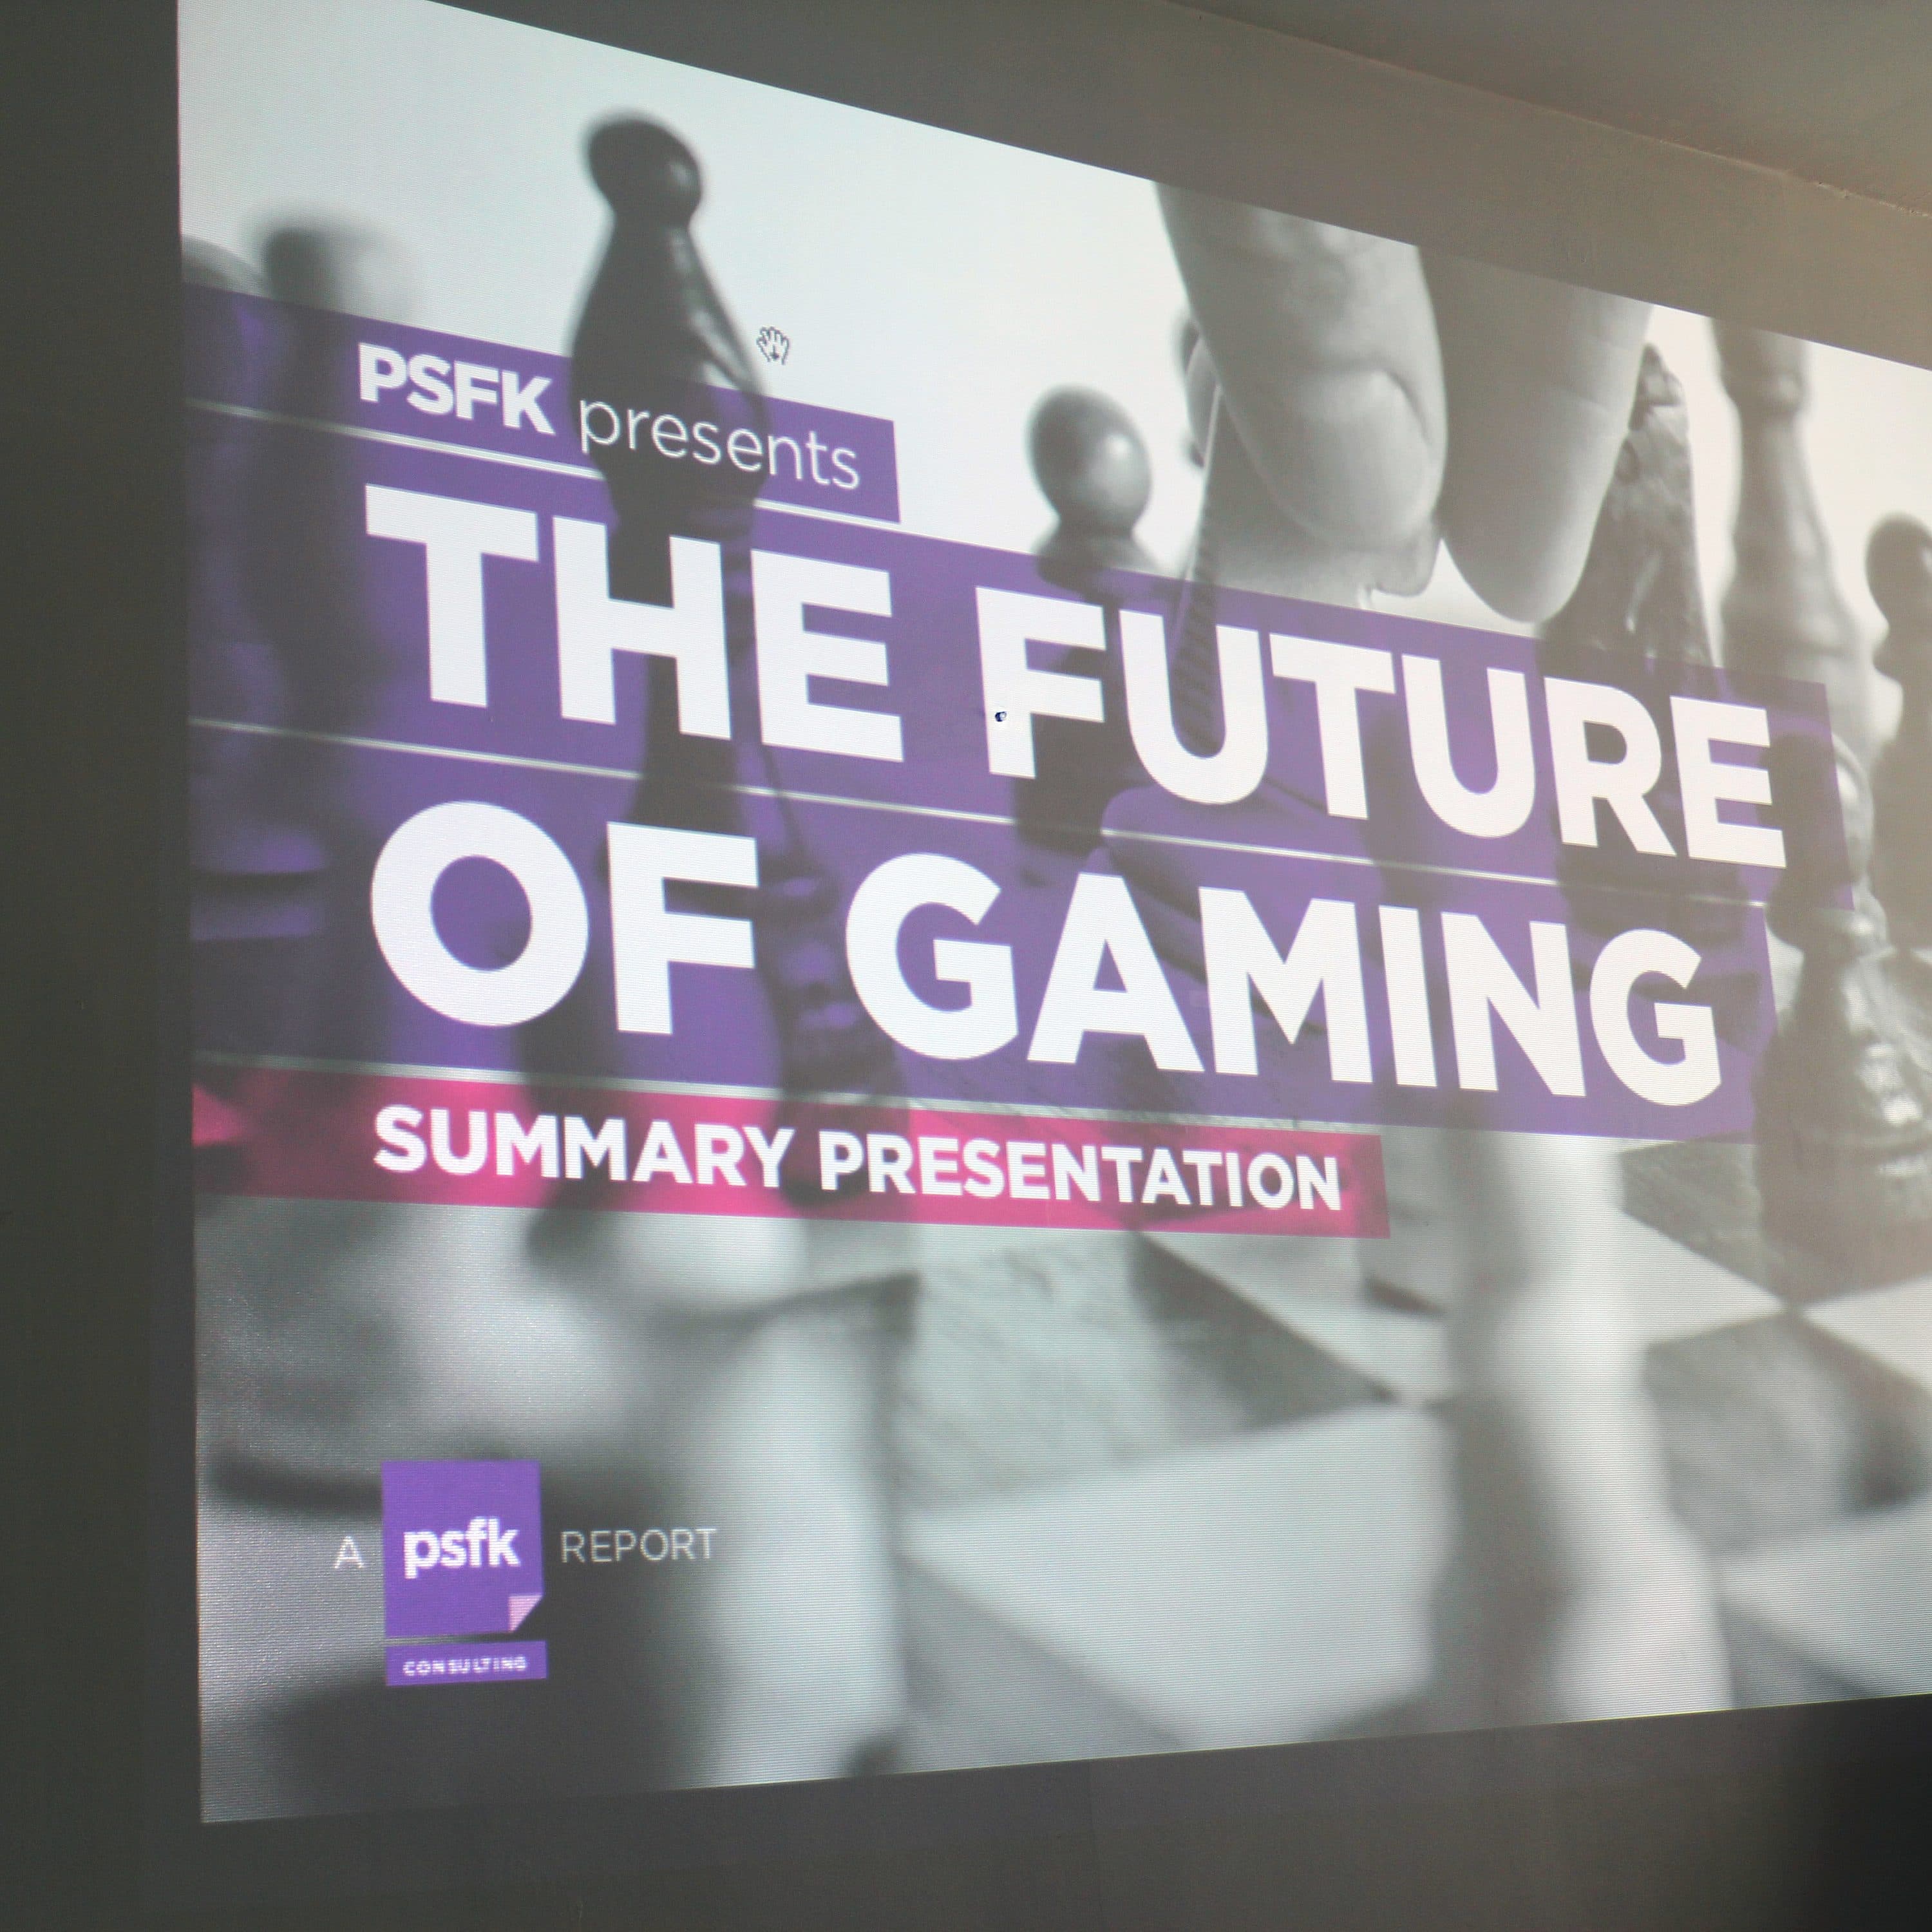 A presentation slide is displayed on a screen, titled "PSFK presents THE FUTURE OF GAMING, SUMMARY PRESENTATION." The background features a black and white image of a person moving a chess piece. A psfk report badge is visible at the bottom left.